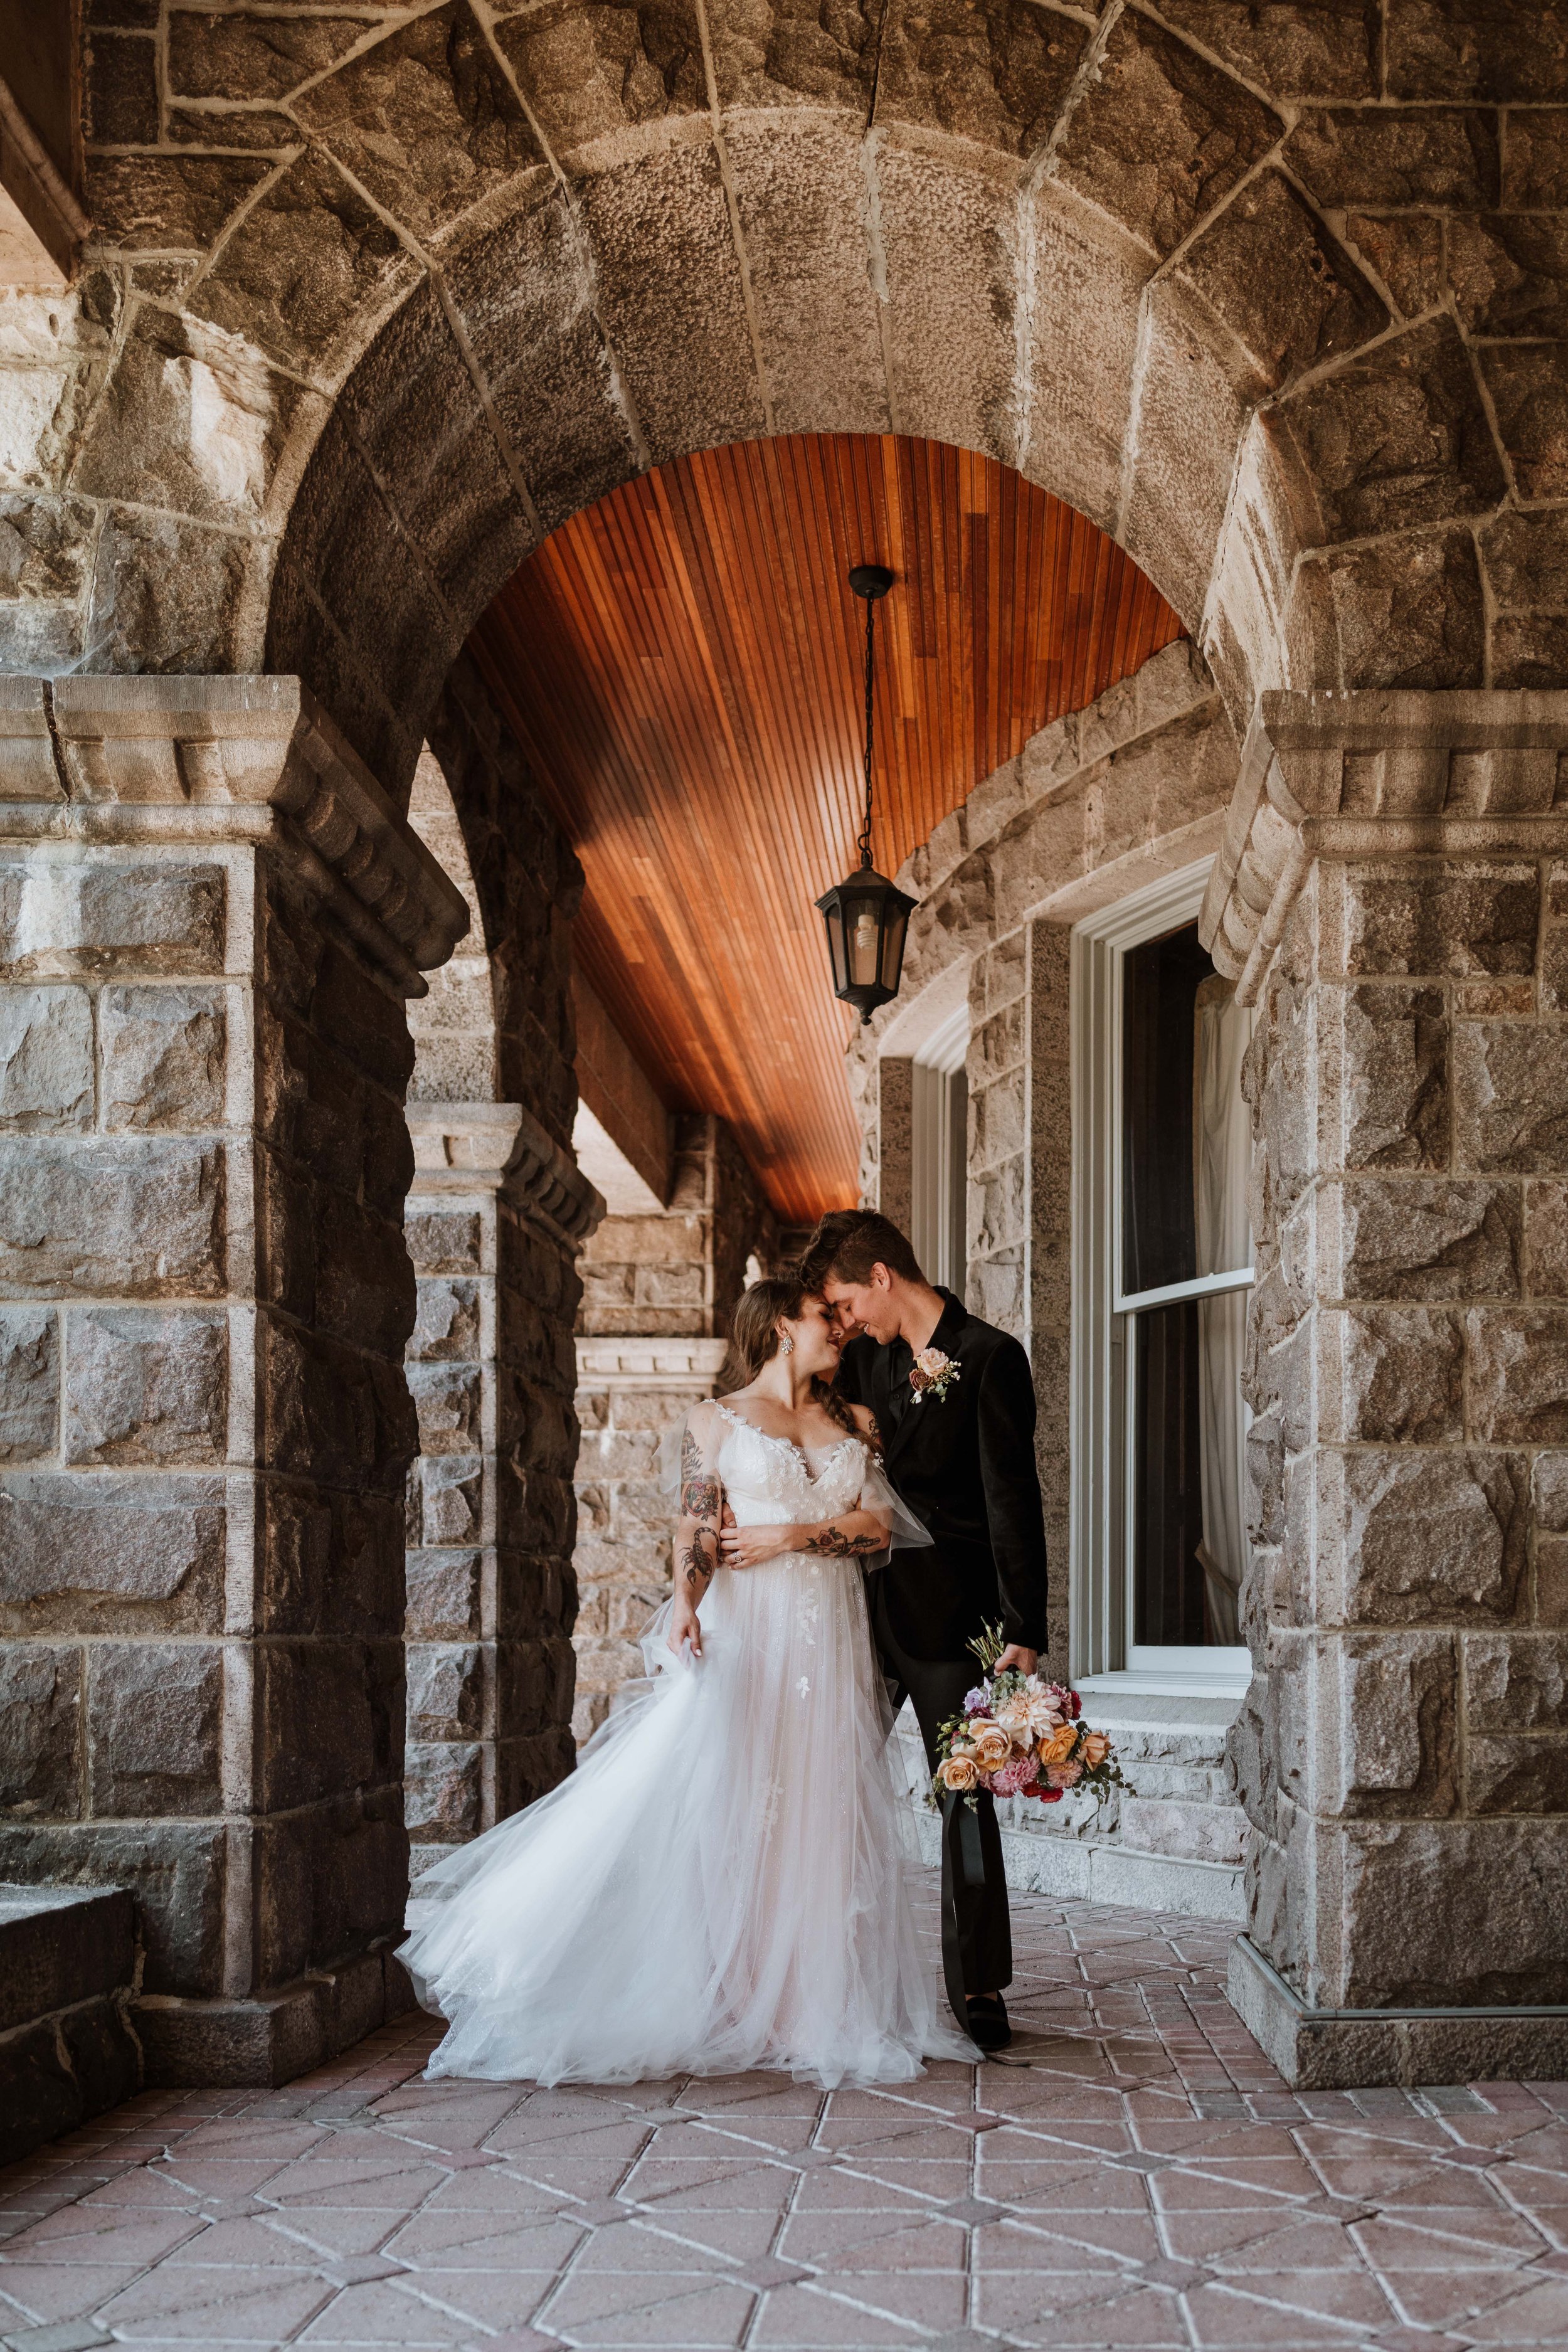 Wedding at Boldt Castle in Thousand Islands, New York.